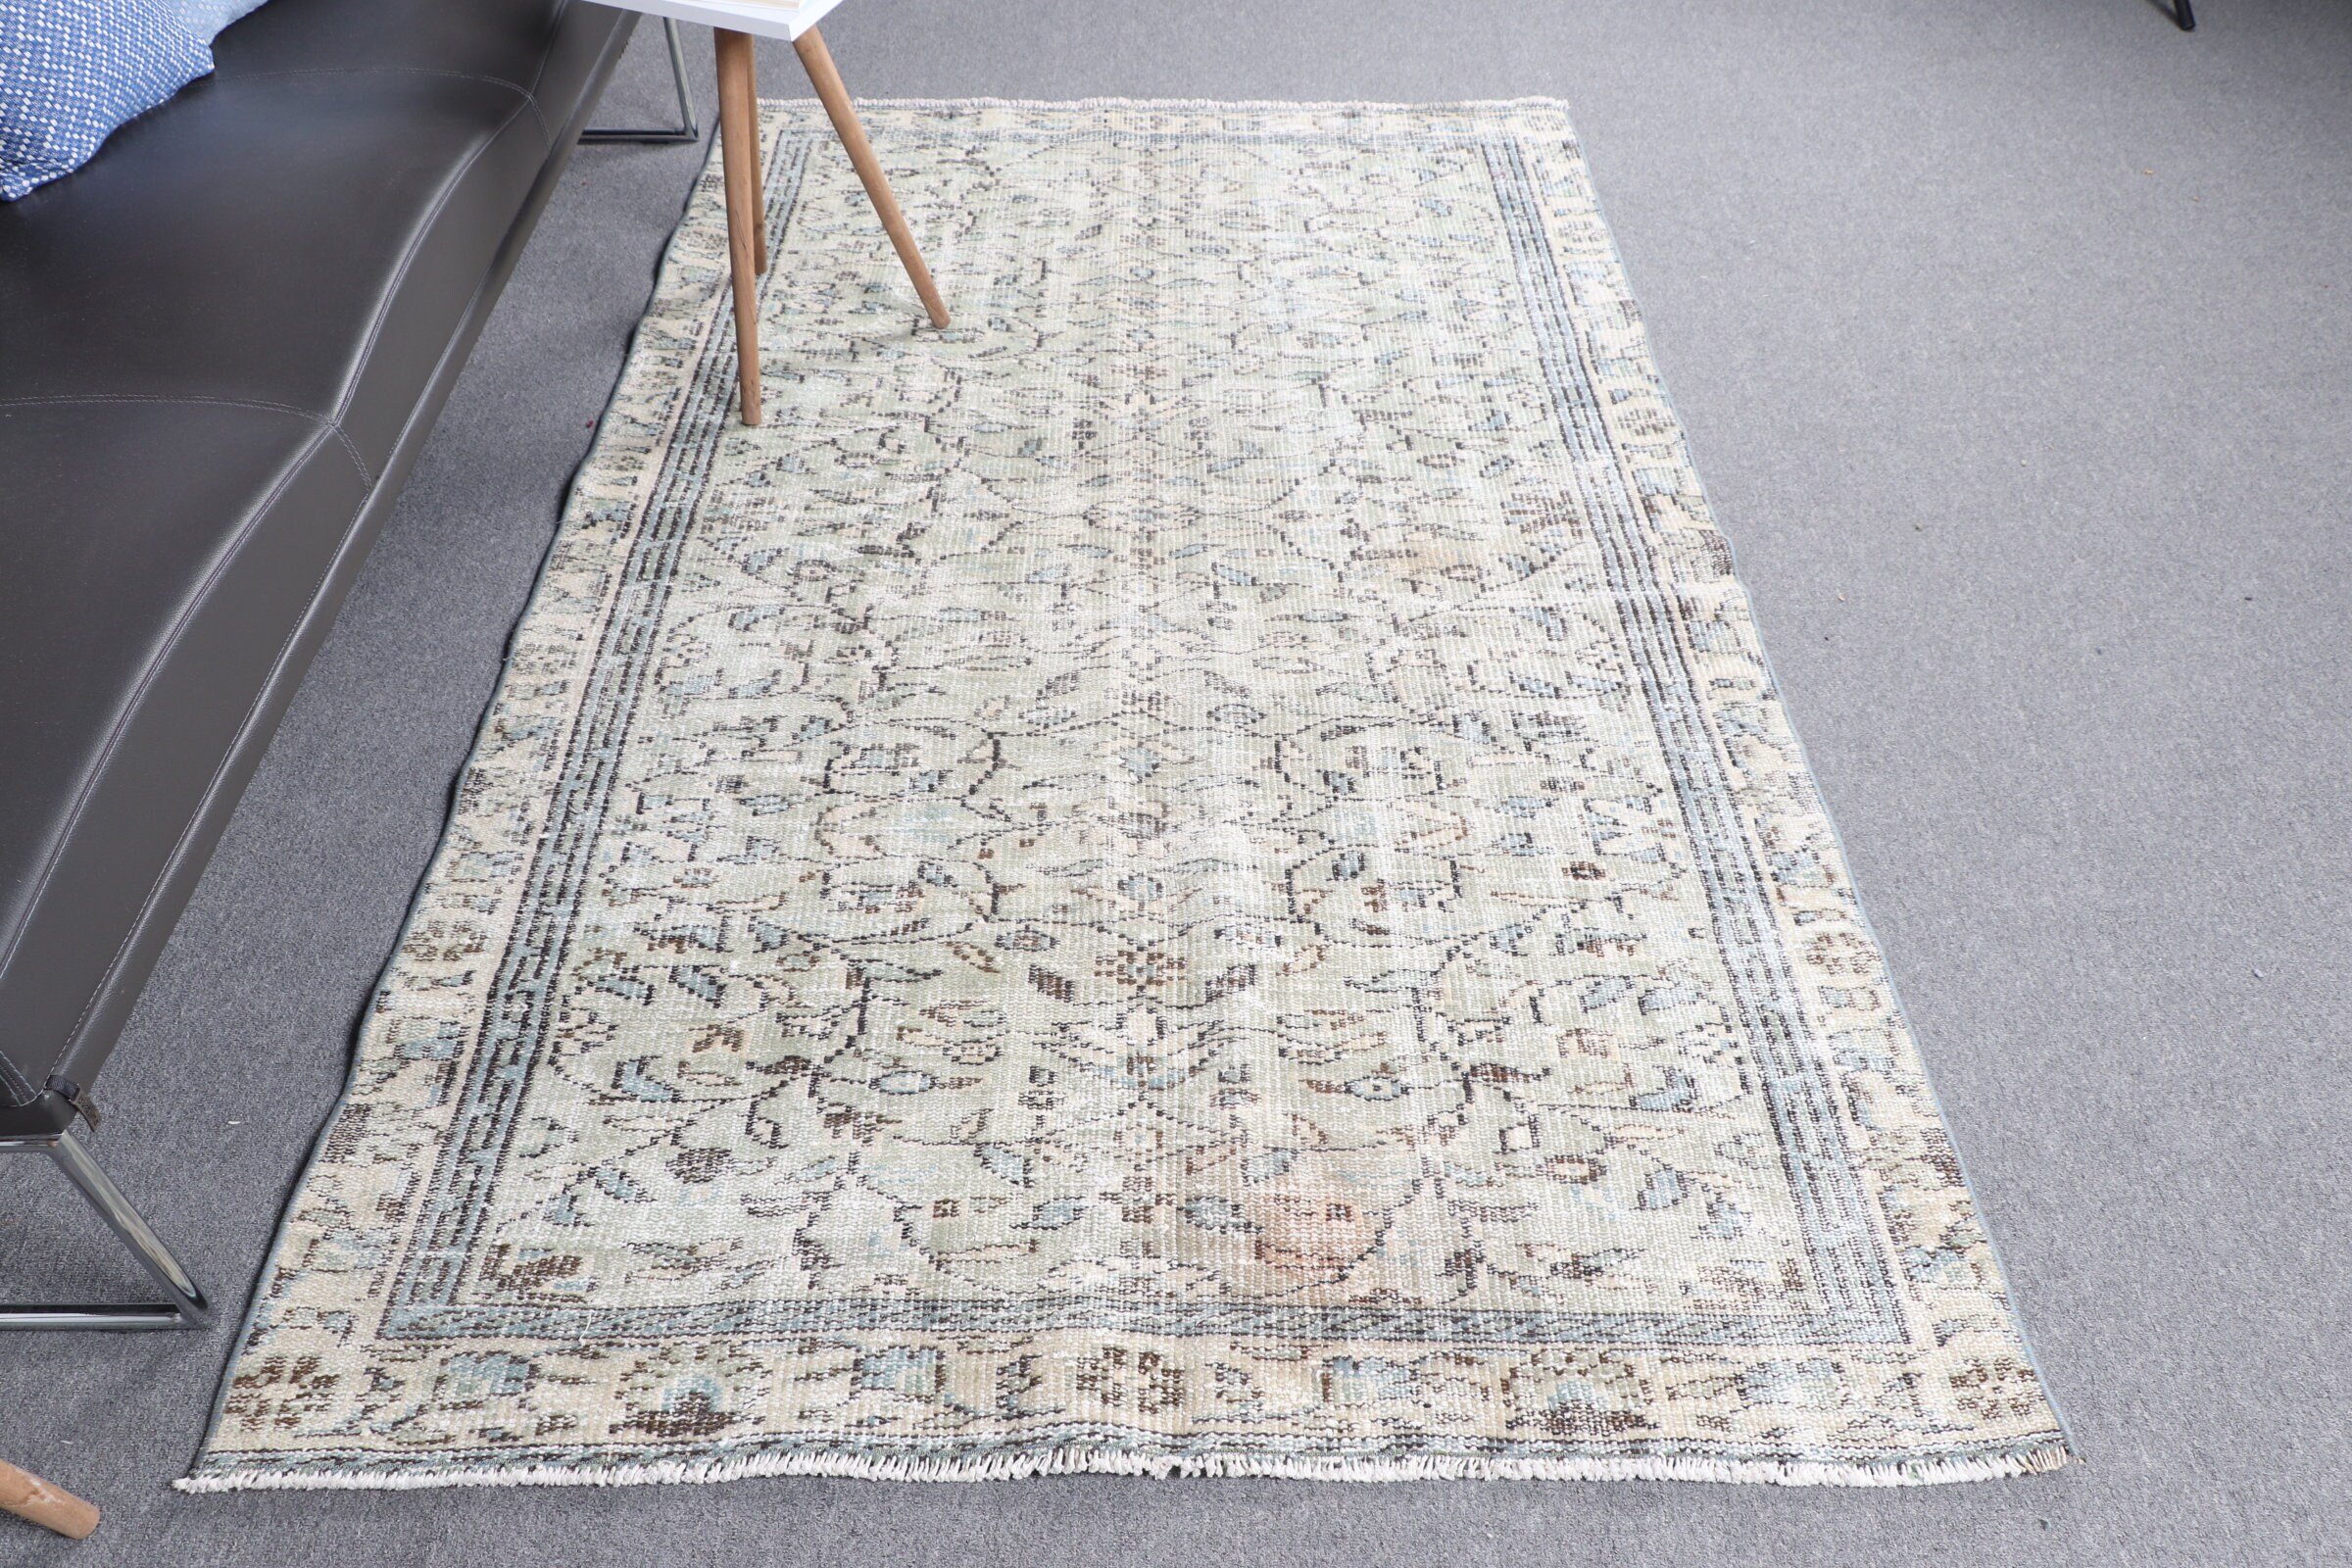 Vintage Rug, Antique Rug, Rugs for Area, Indoor Rug, Dining Room Rugs, Oushak Rugs, 4.3x7.2 ft Area Rugs, Turkish Rug, Green Kitchen Rugs